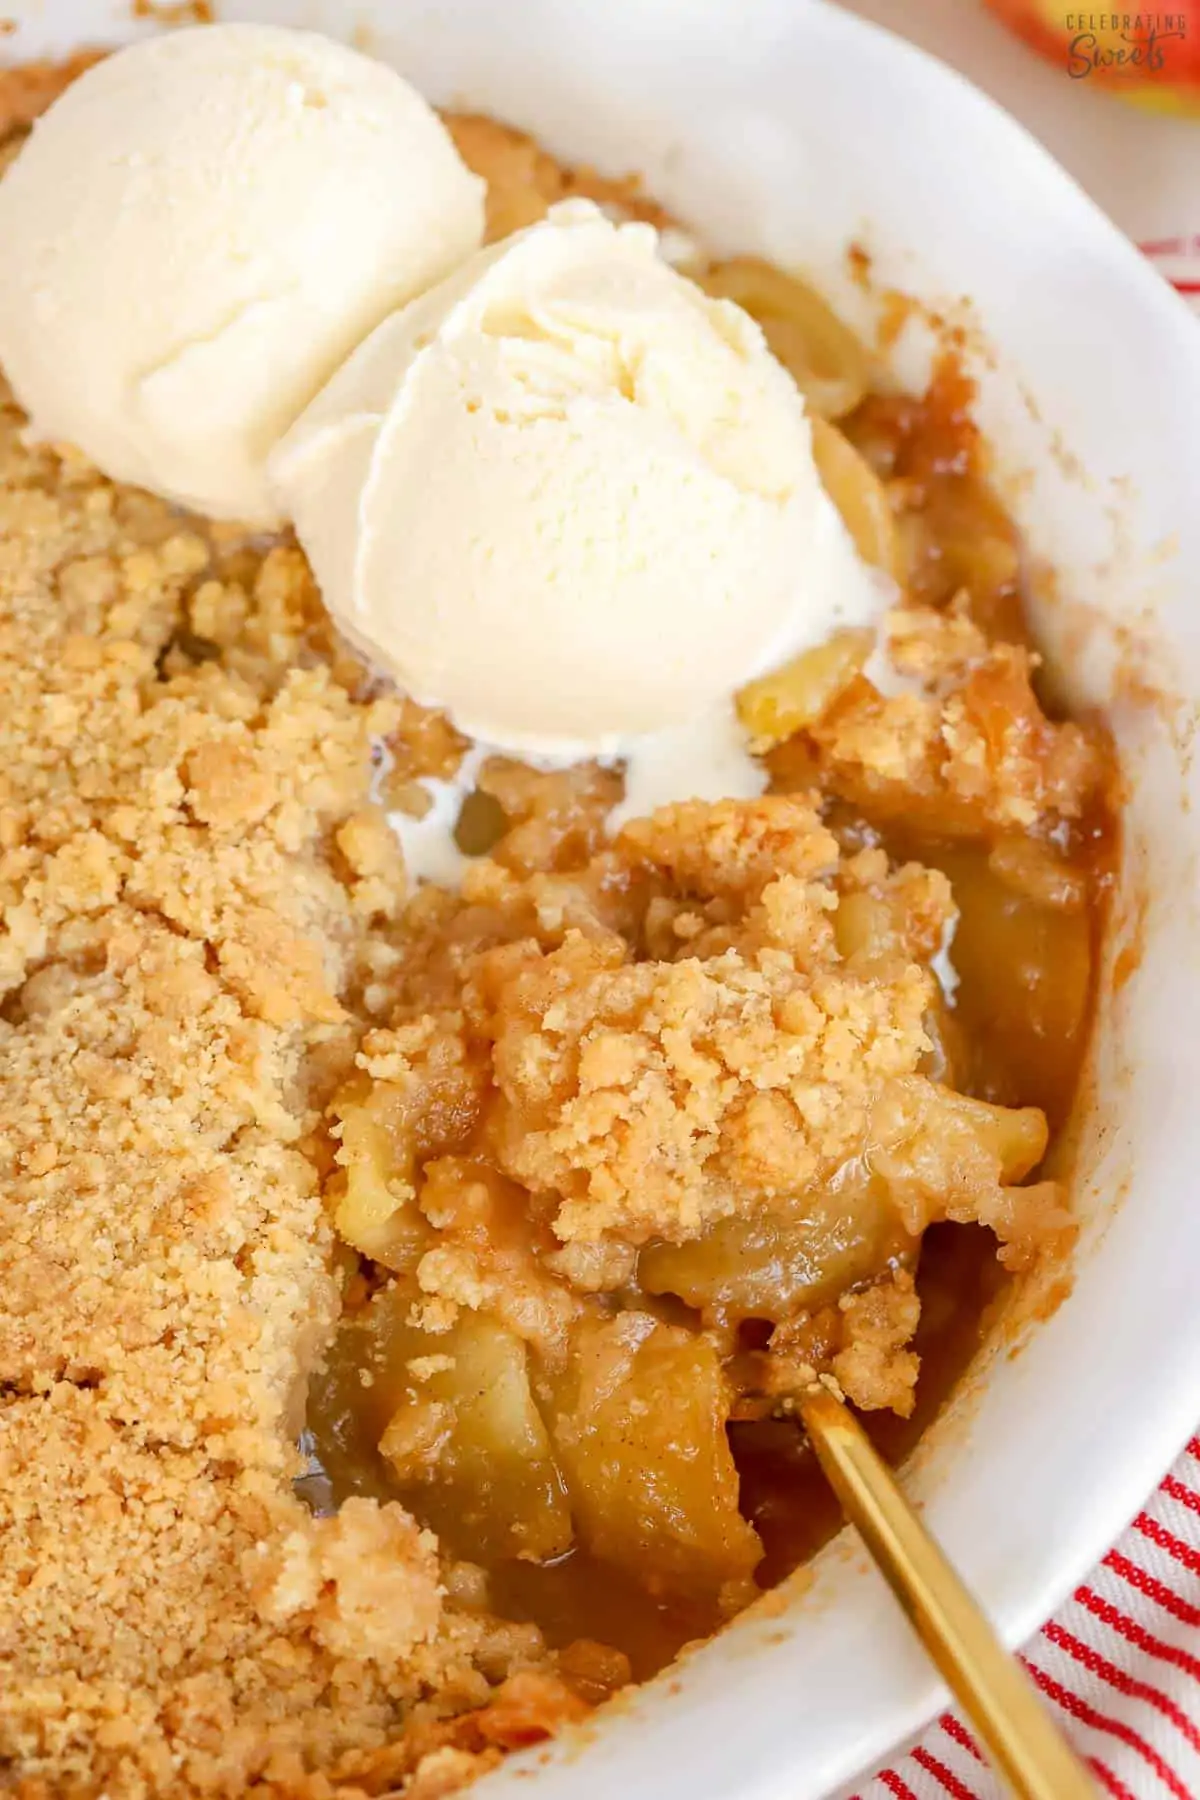 Apple crumble topped with two scoops of vanilla ice cream in a white baking dish.